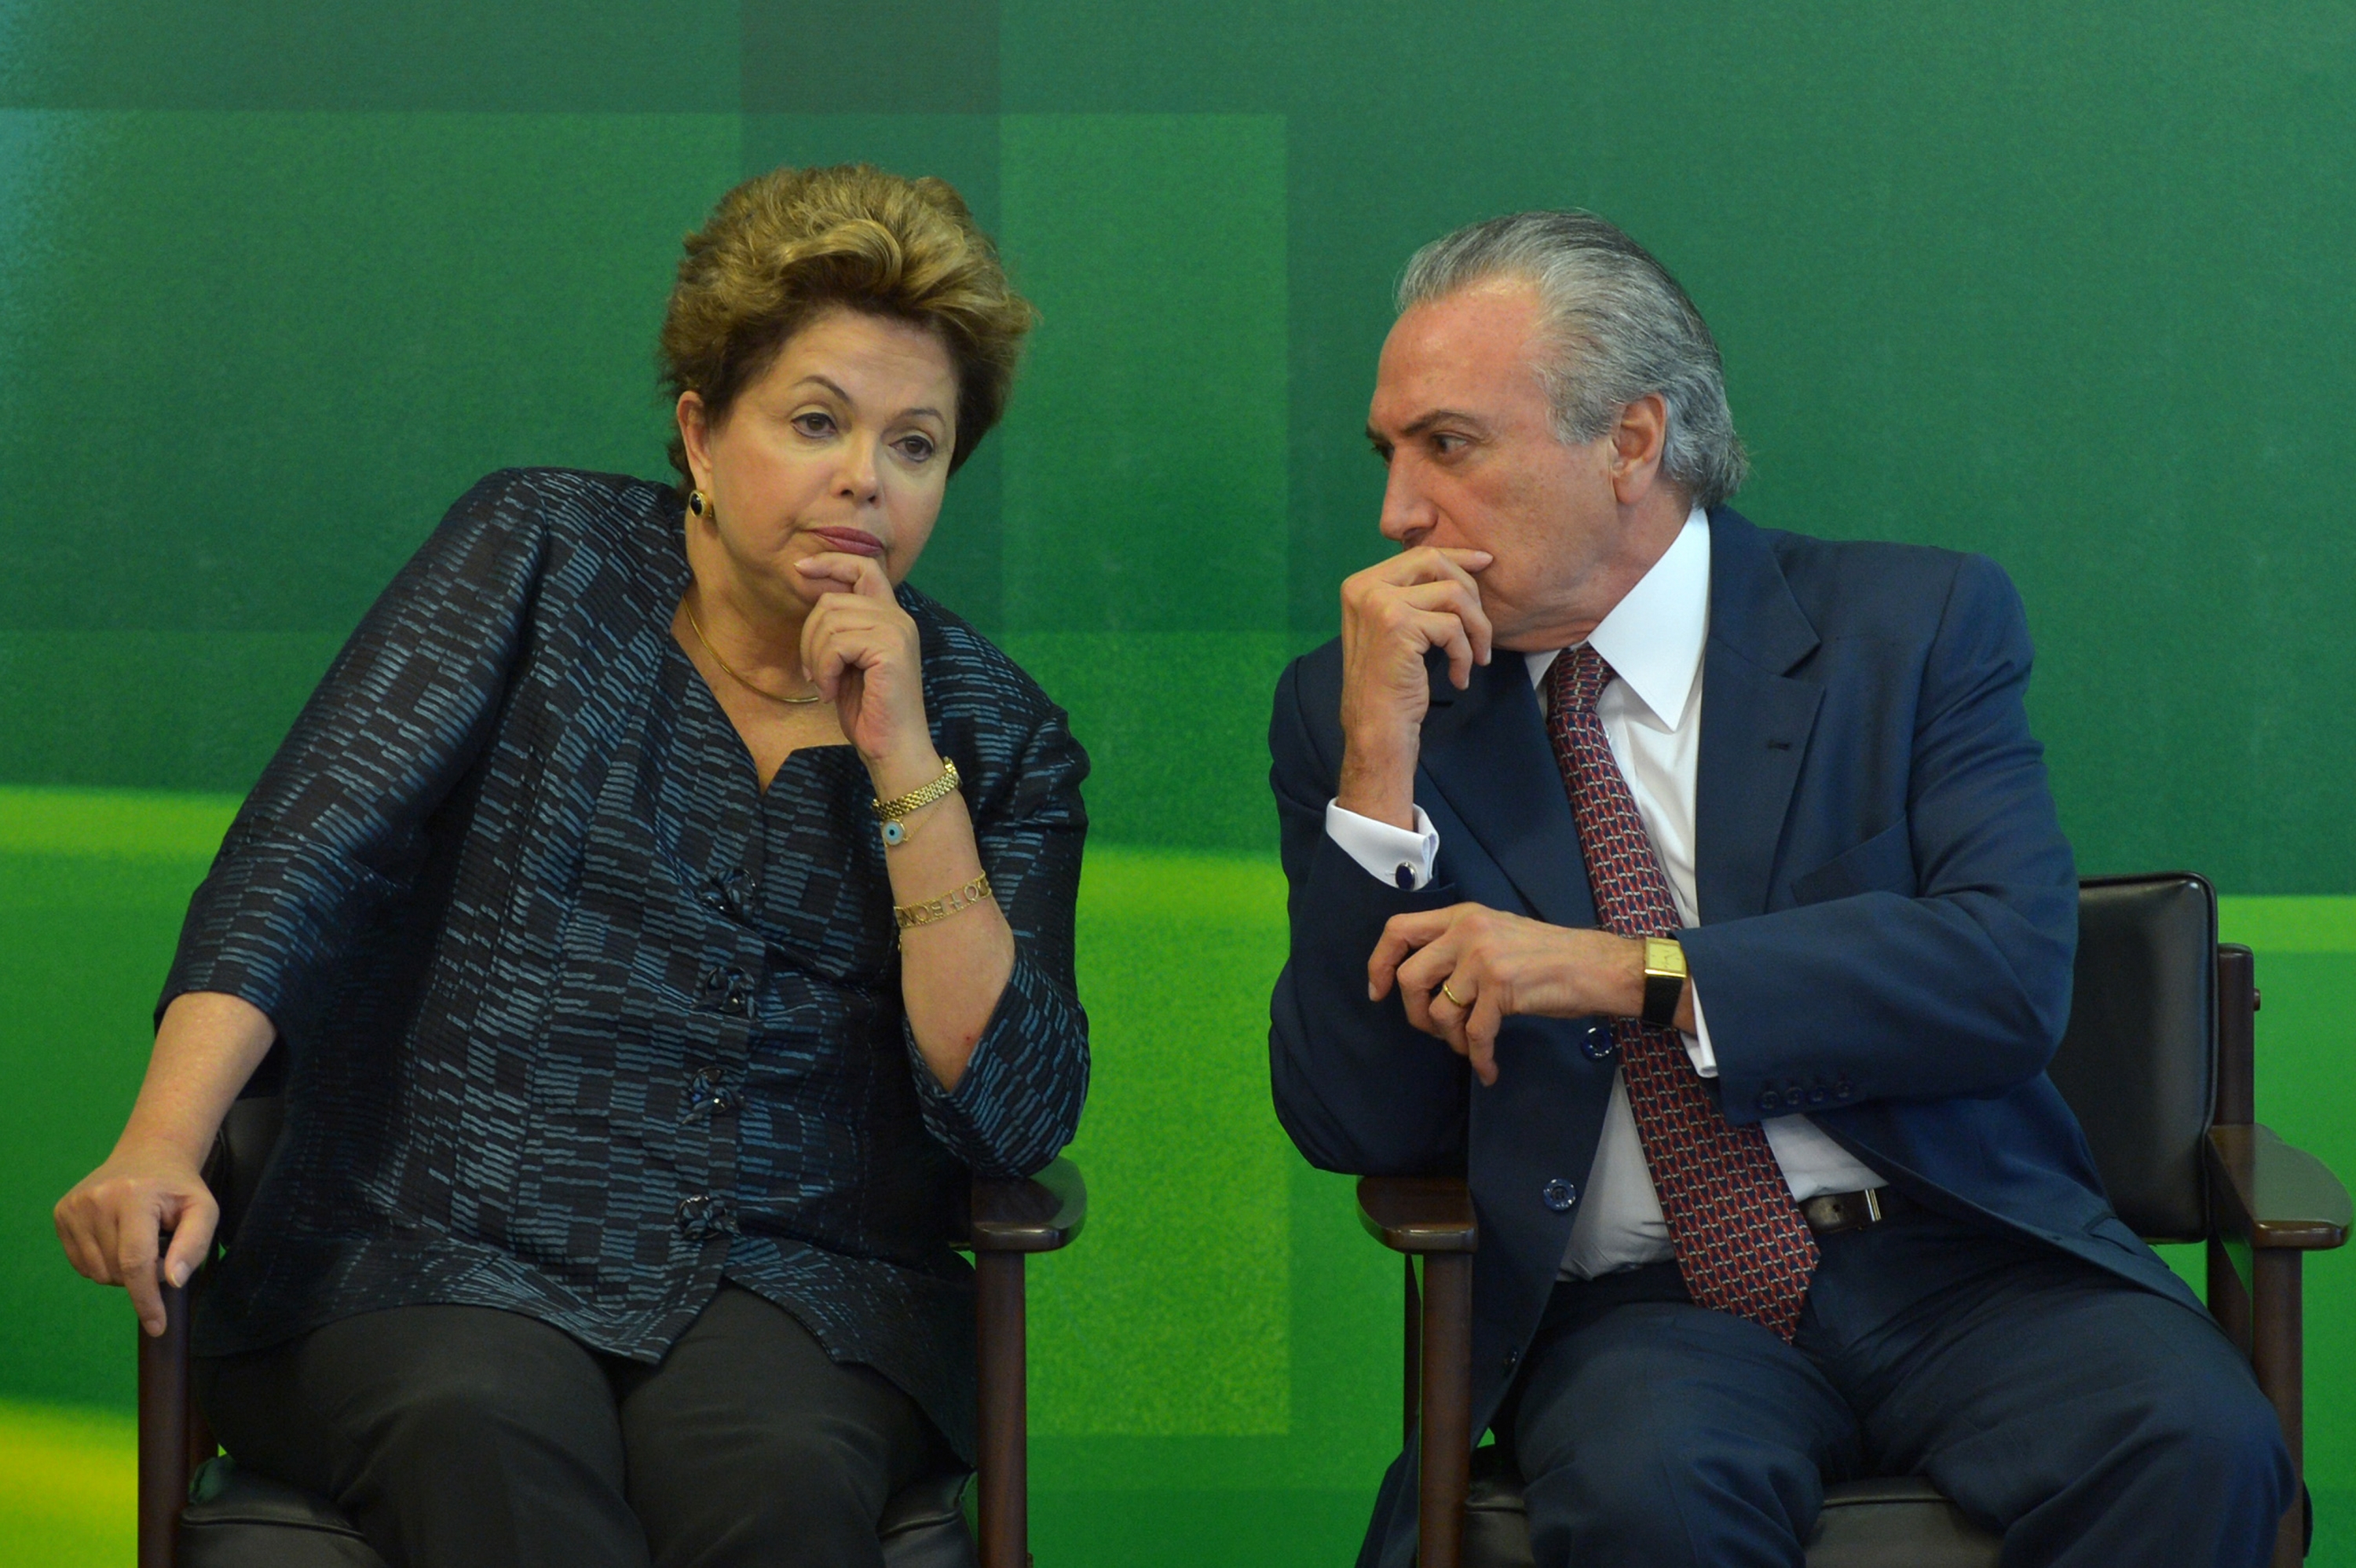 Vice President Michel Temer said that the government had 